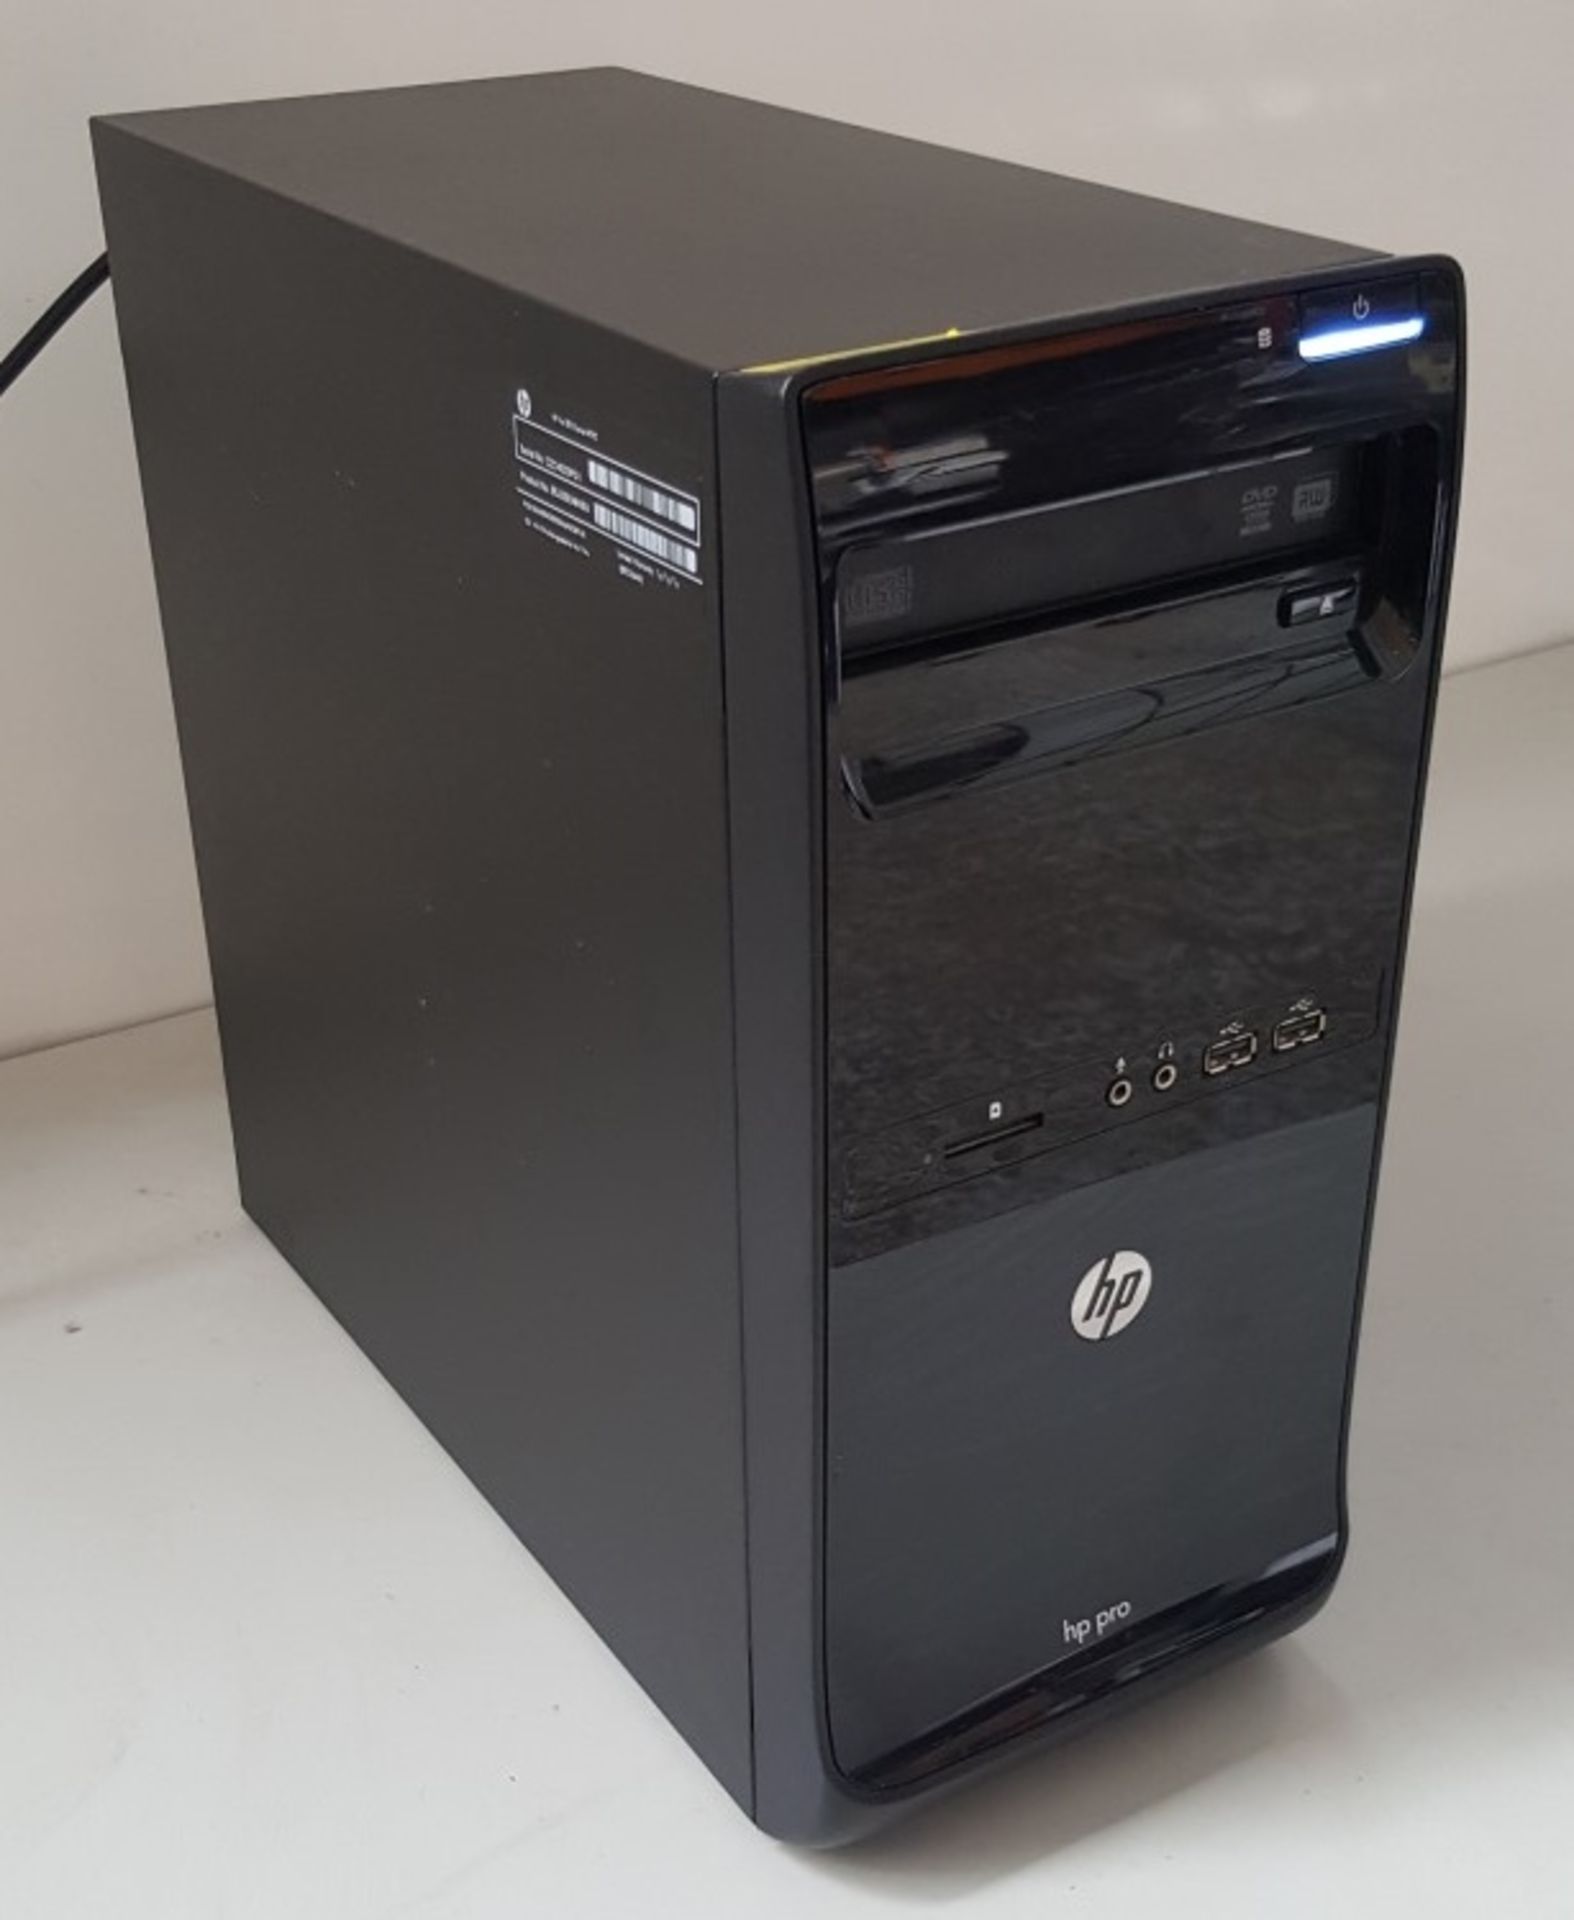 1 x HP Pro 3515 MT AMD A6-5400K 3.60GHz 4GB RAM Desktop PC - Ref BLT104 - Image 3 of 5